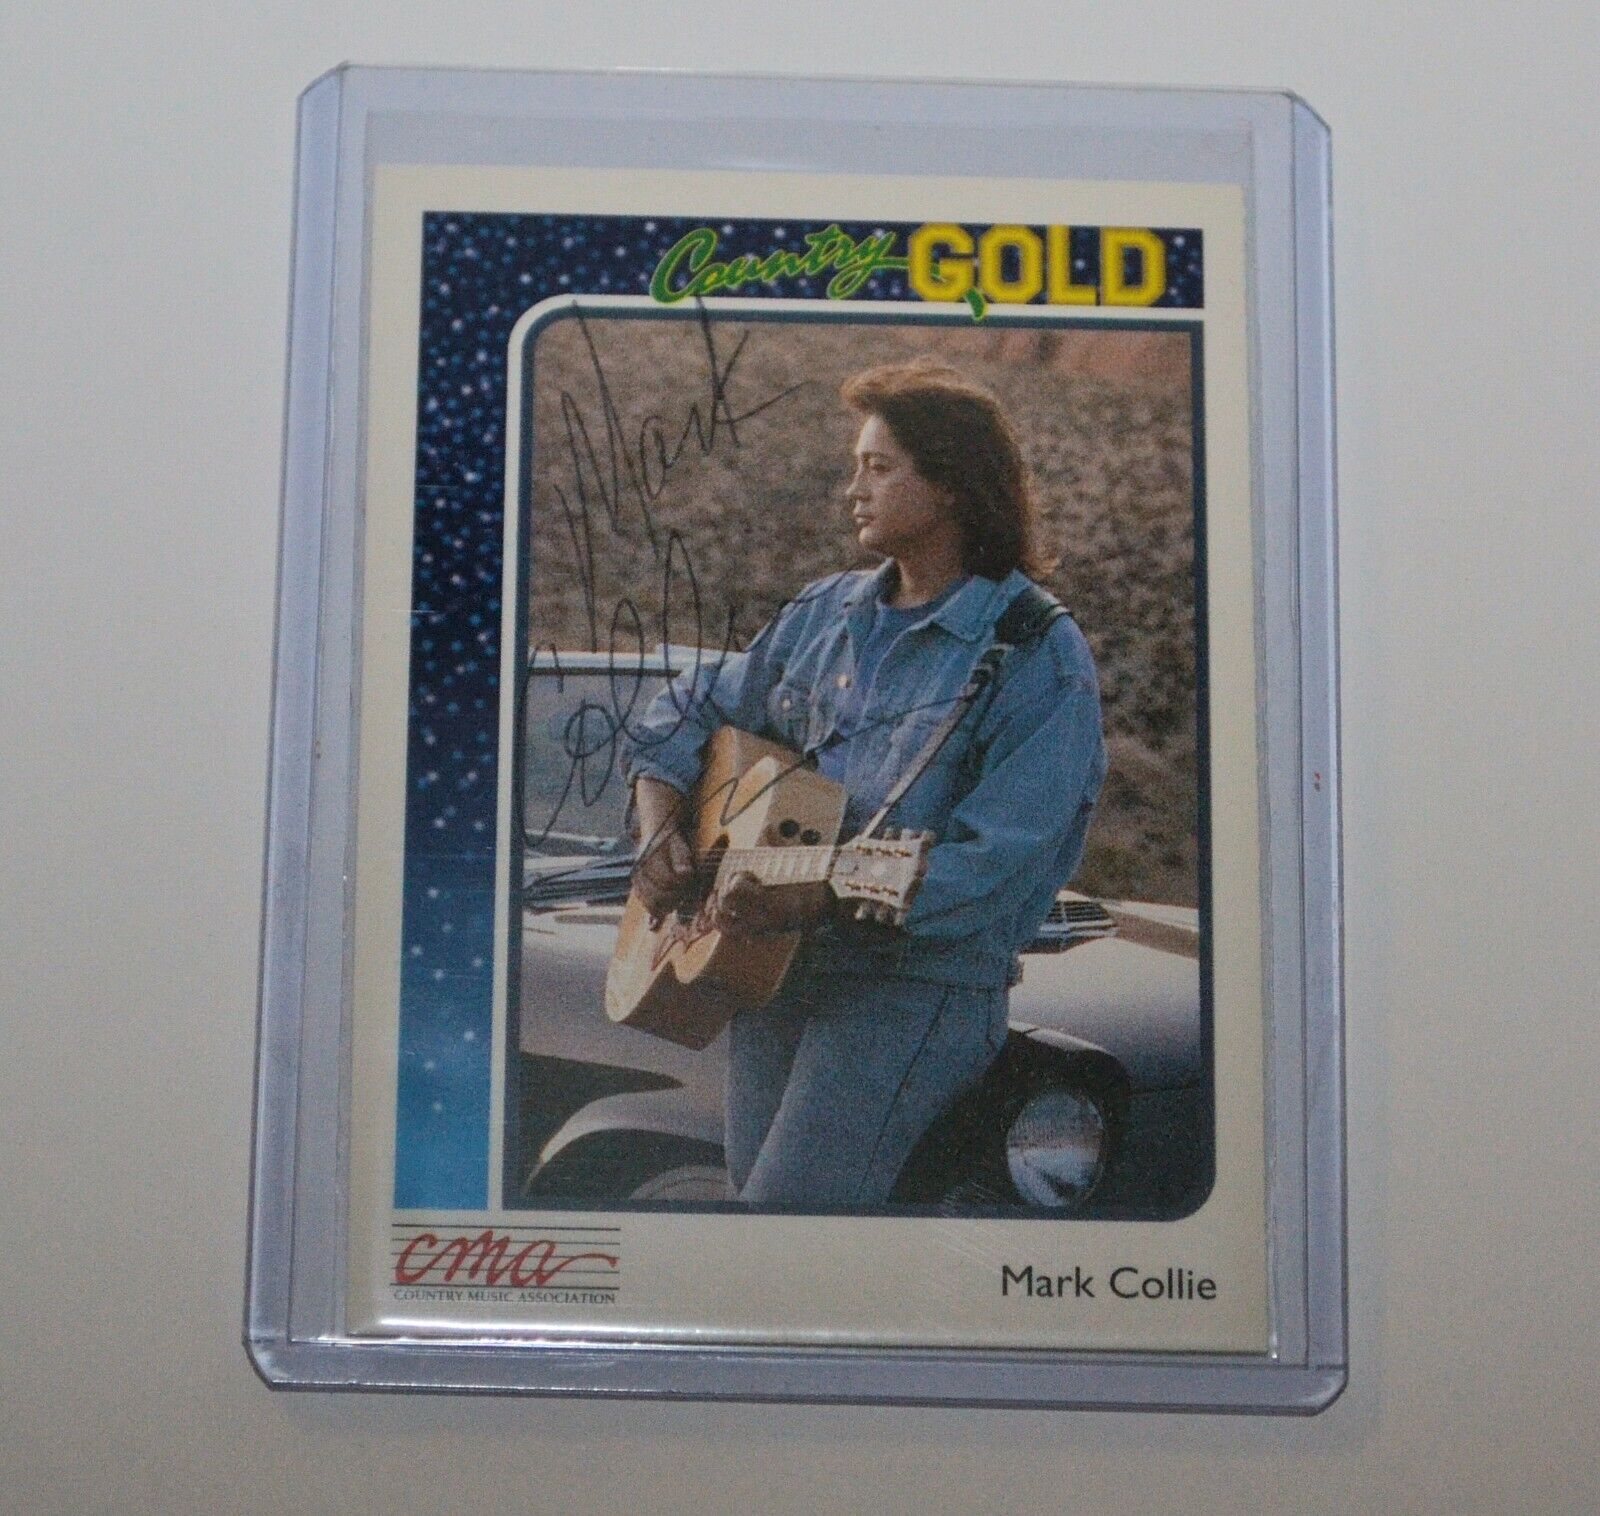 MARK COLLIE Signed CMA COUNTRY GOLD Card Singer